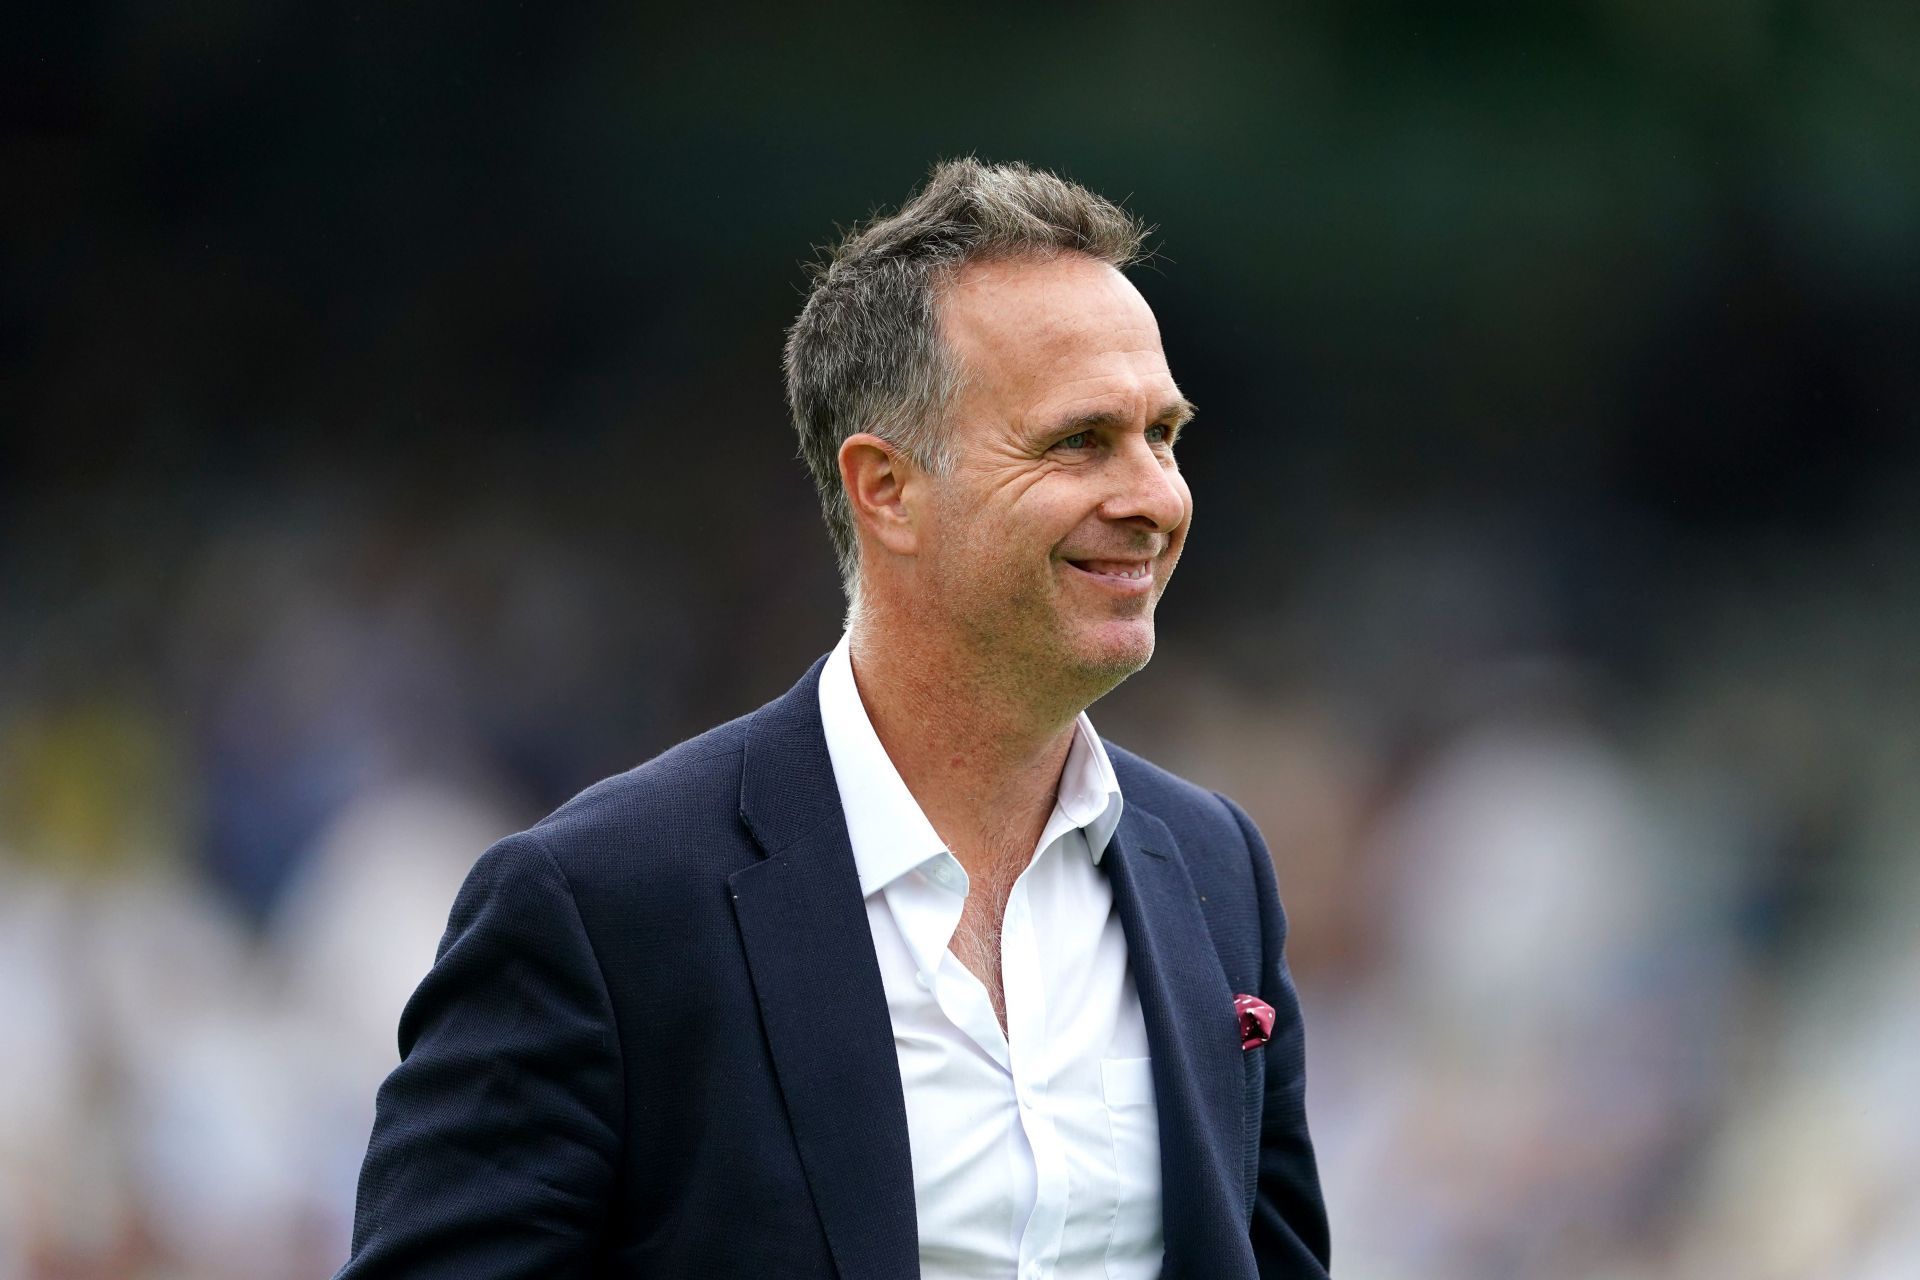 Michael Vaughan believes India are still favorites to win the series